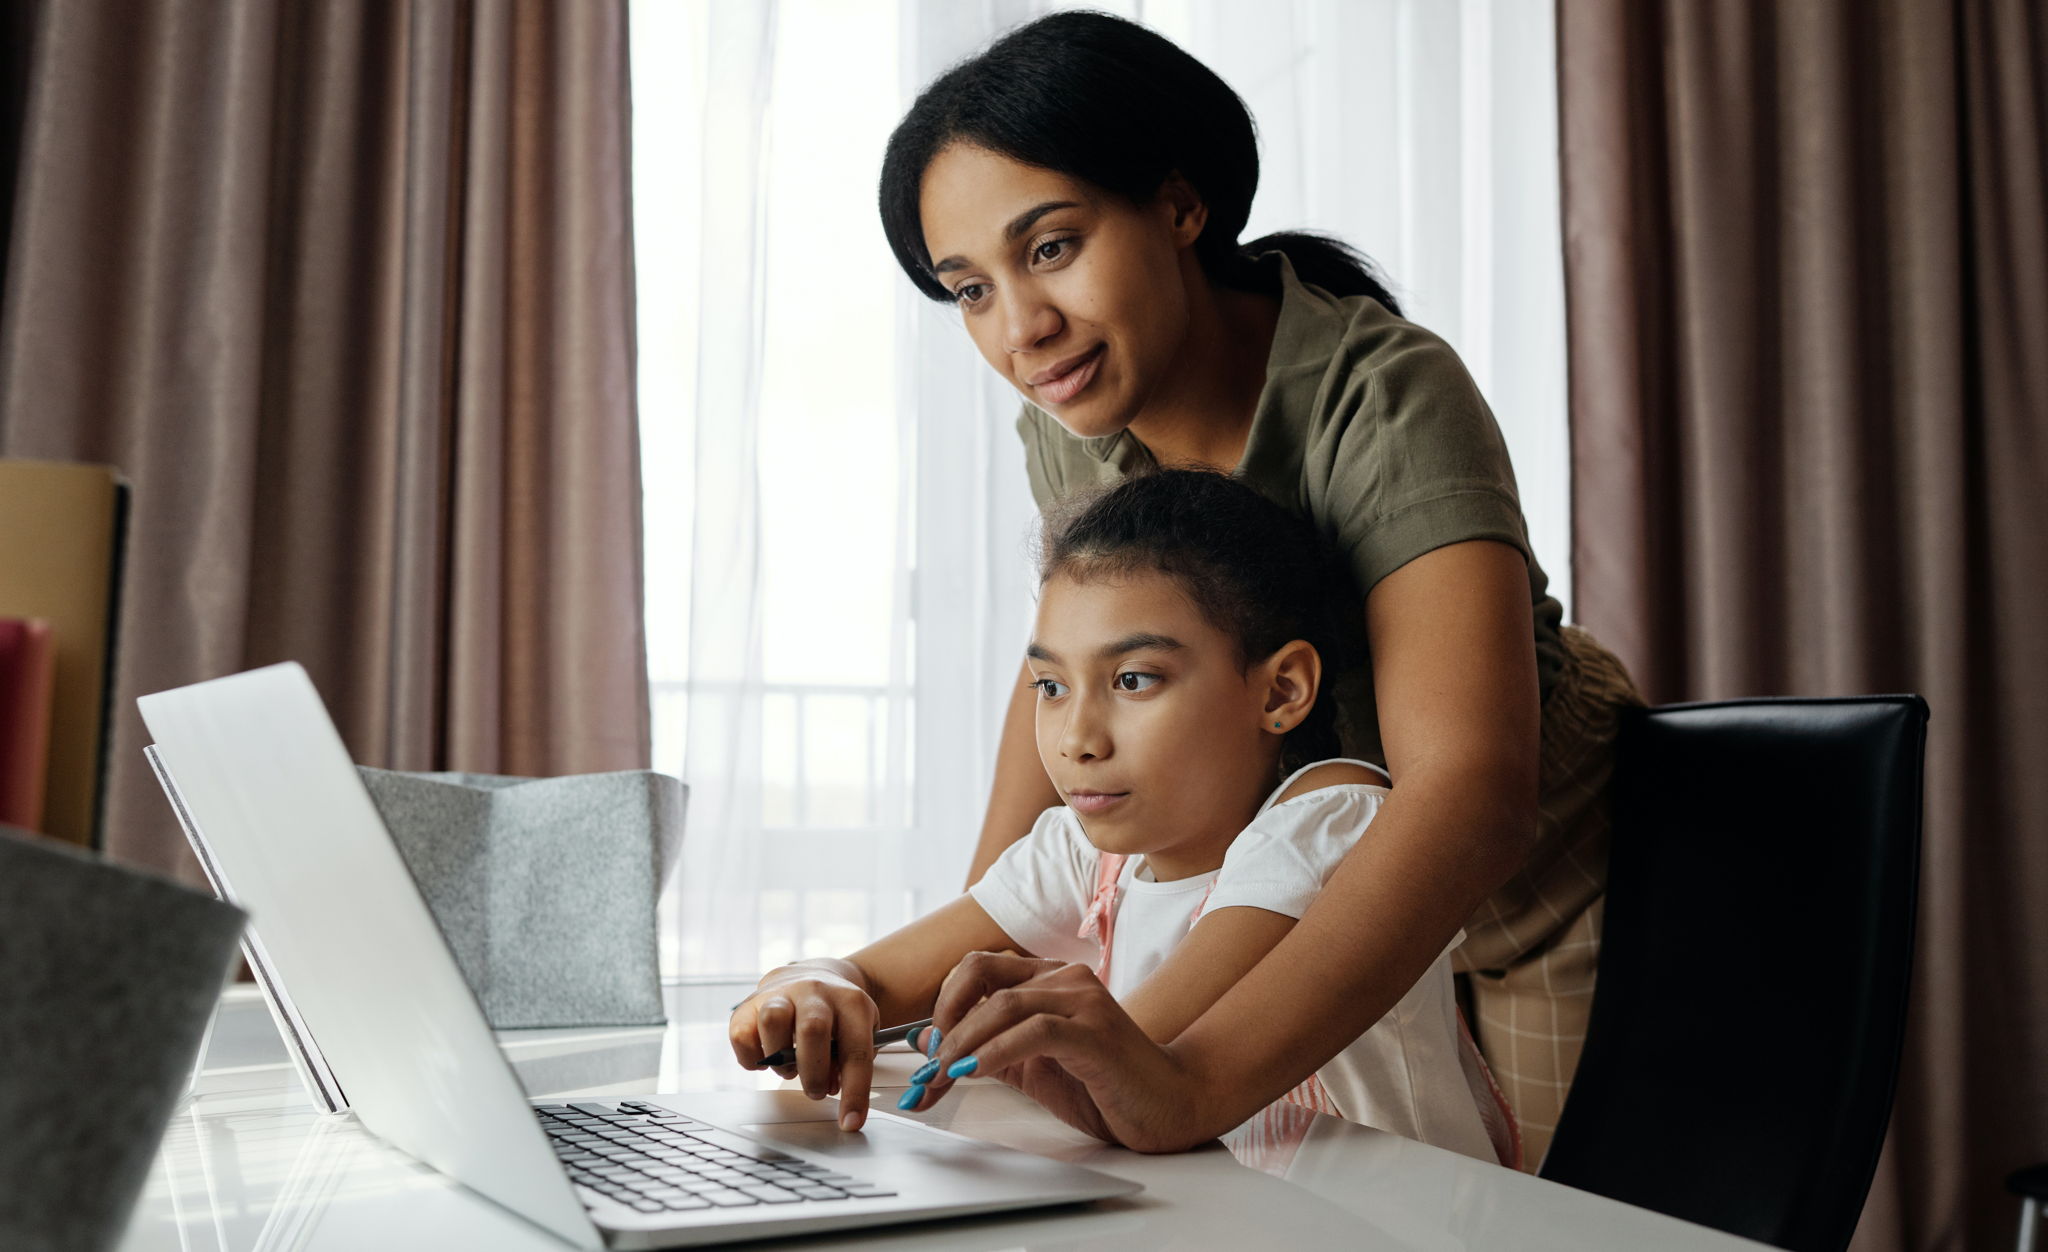 A multi ethnic mom and her daughter, looking at a laptop together at a desk. The mom is guiding the child showing her things on the computer.